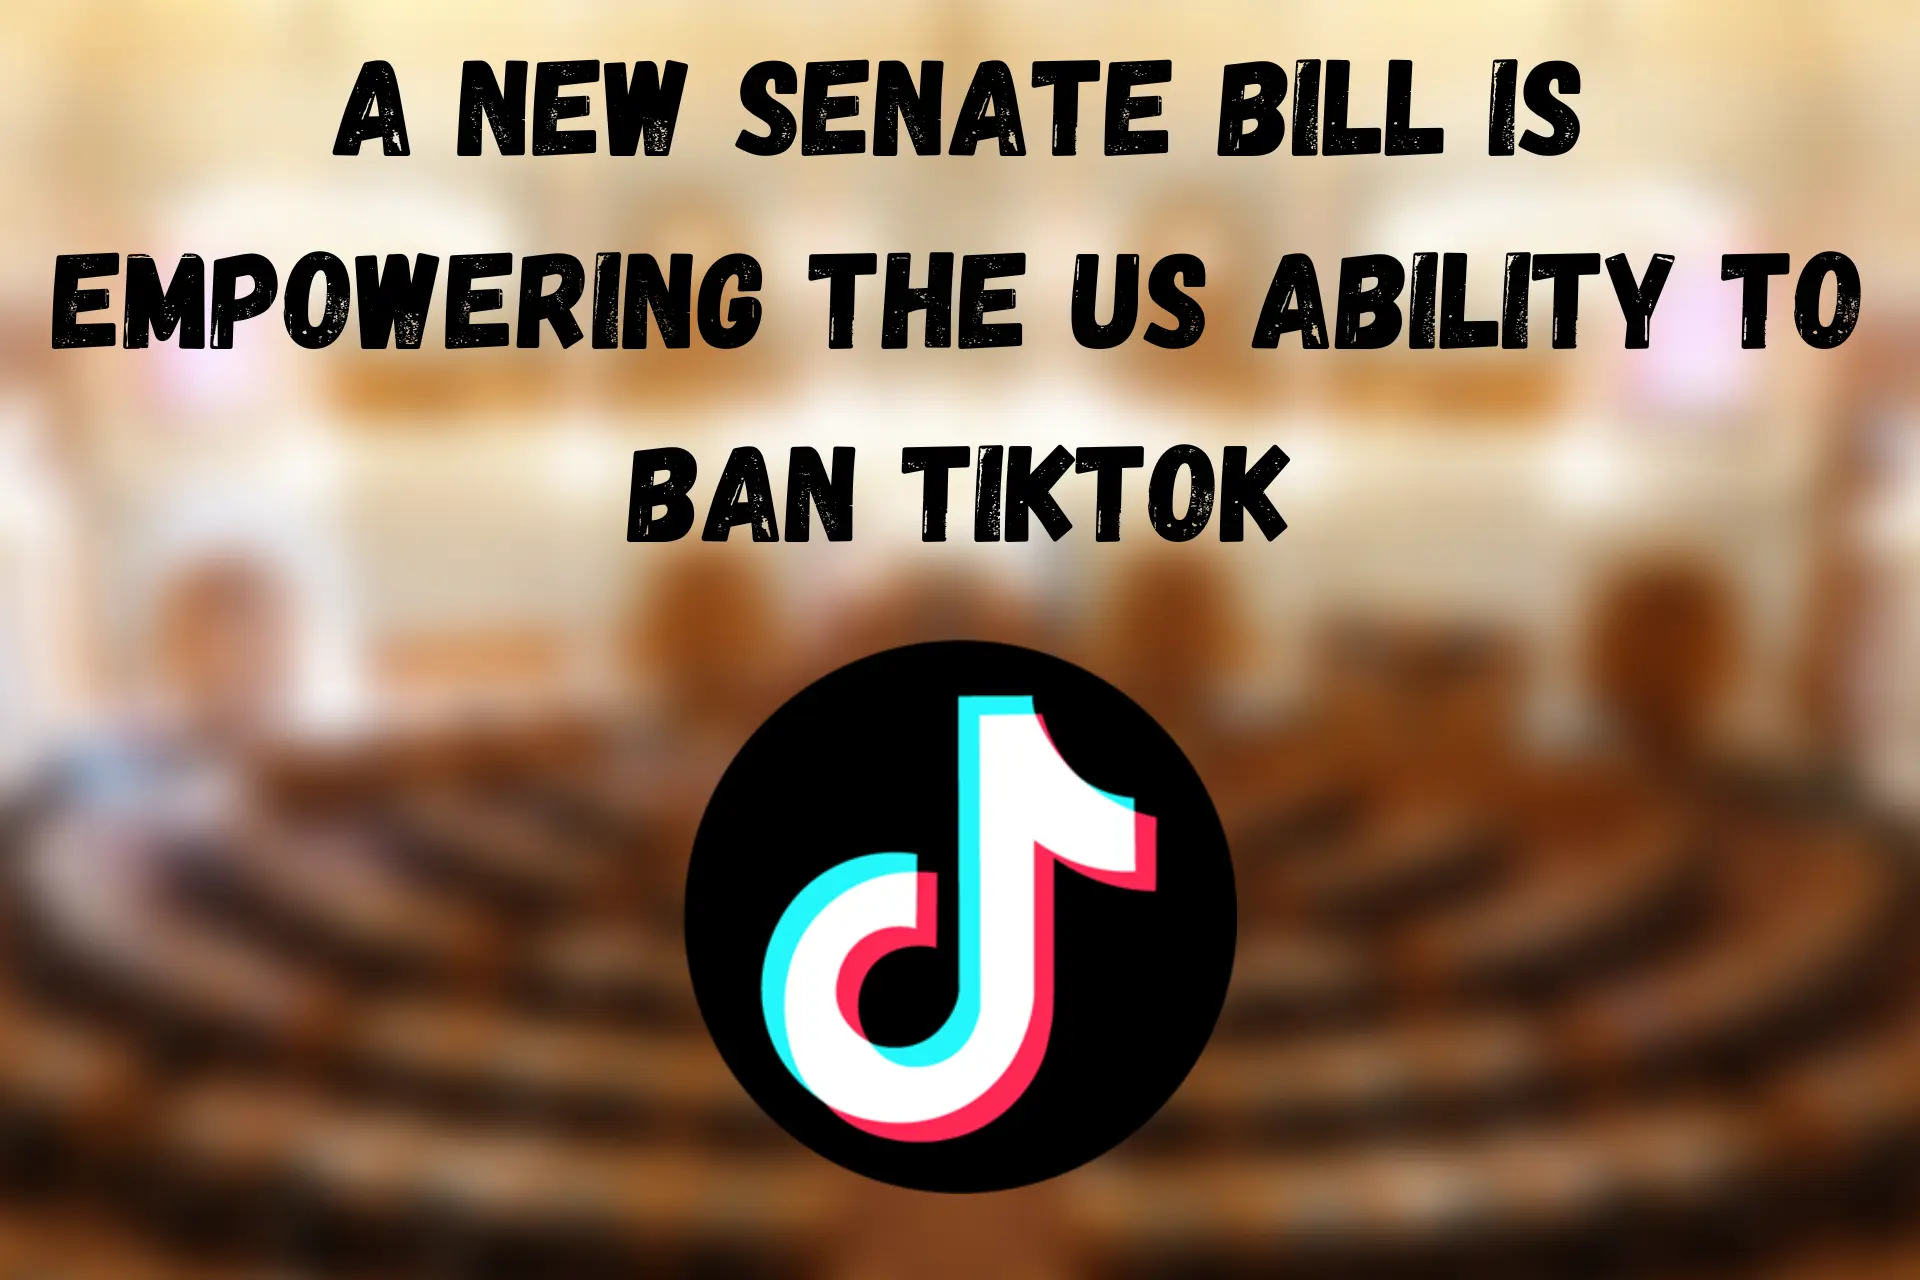 A new bill empowering the US to ban TikTok